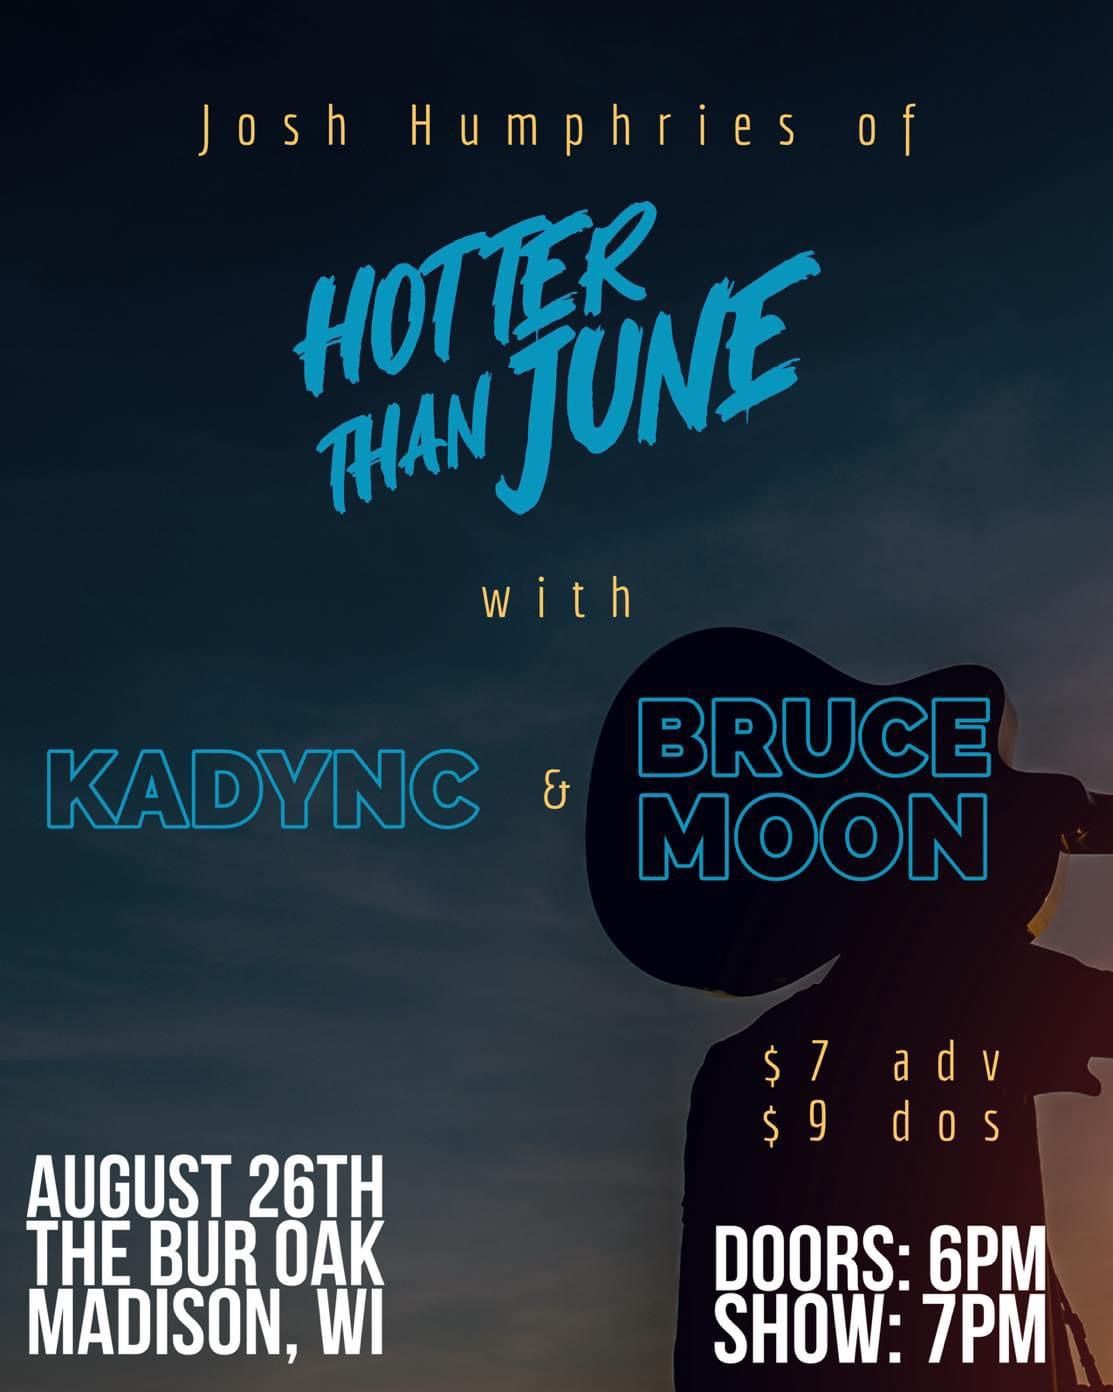 Josh Humphries of Hotter Than June with Kadync and Bruce Moon